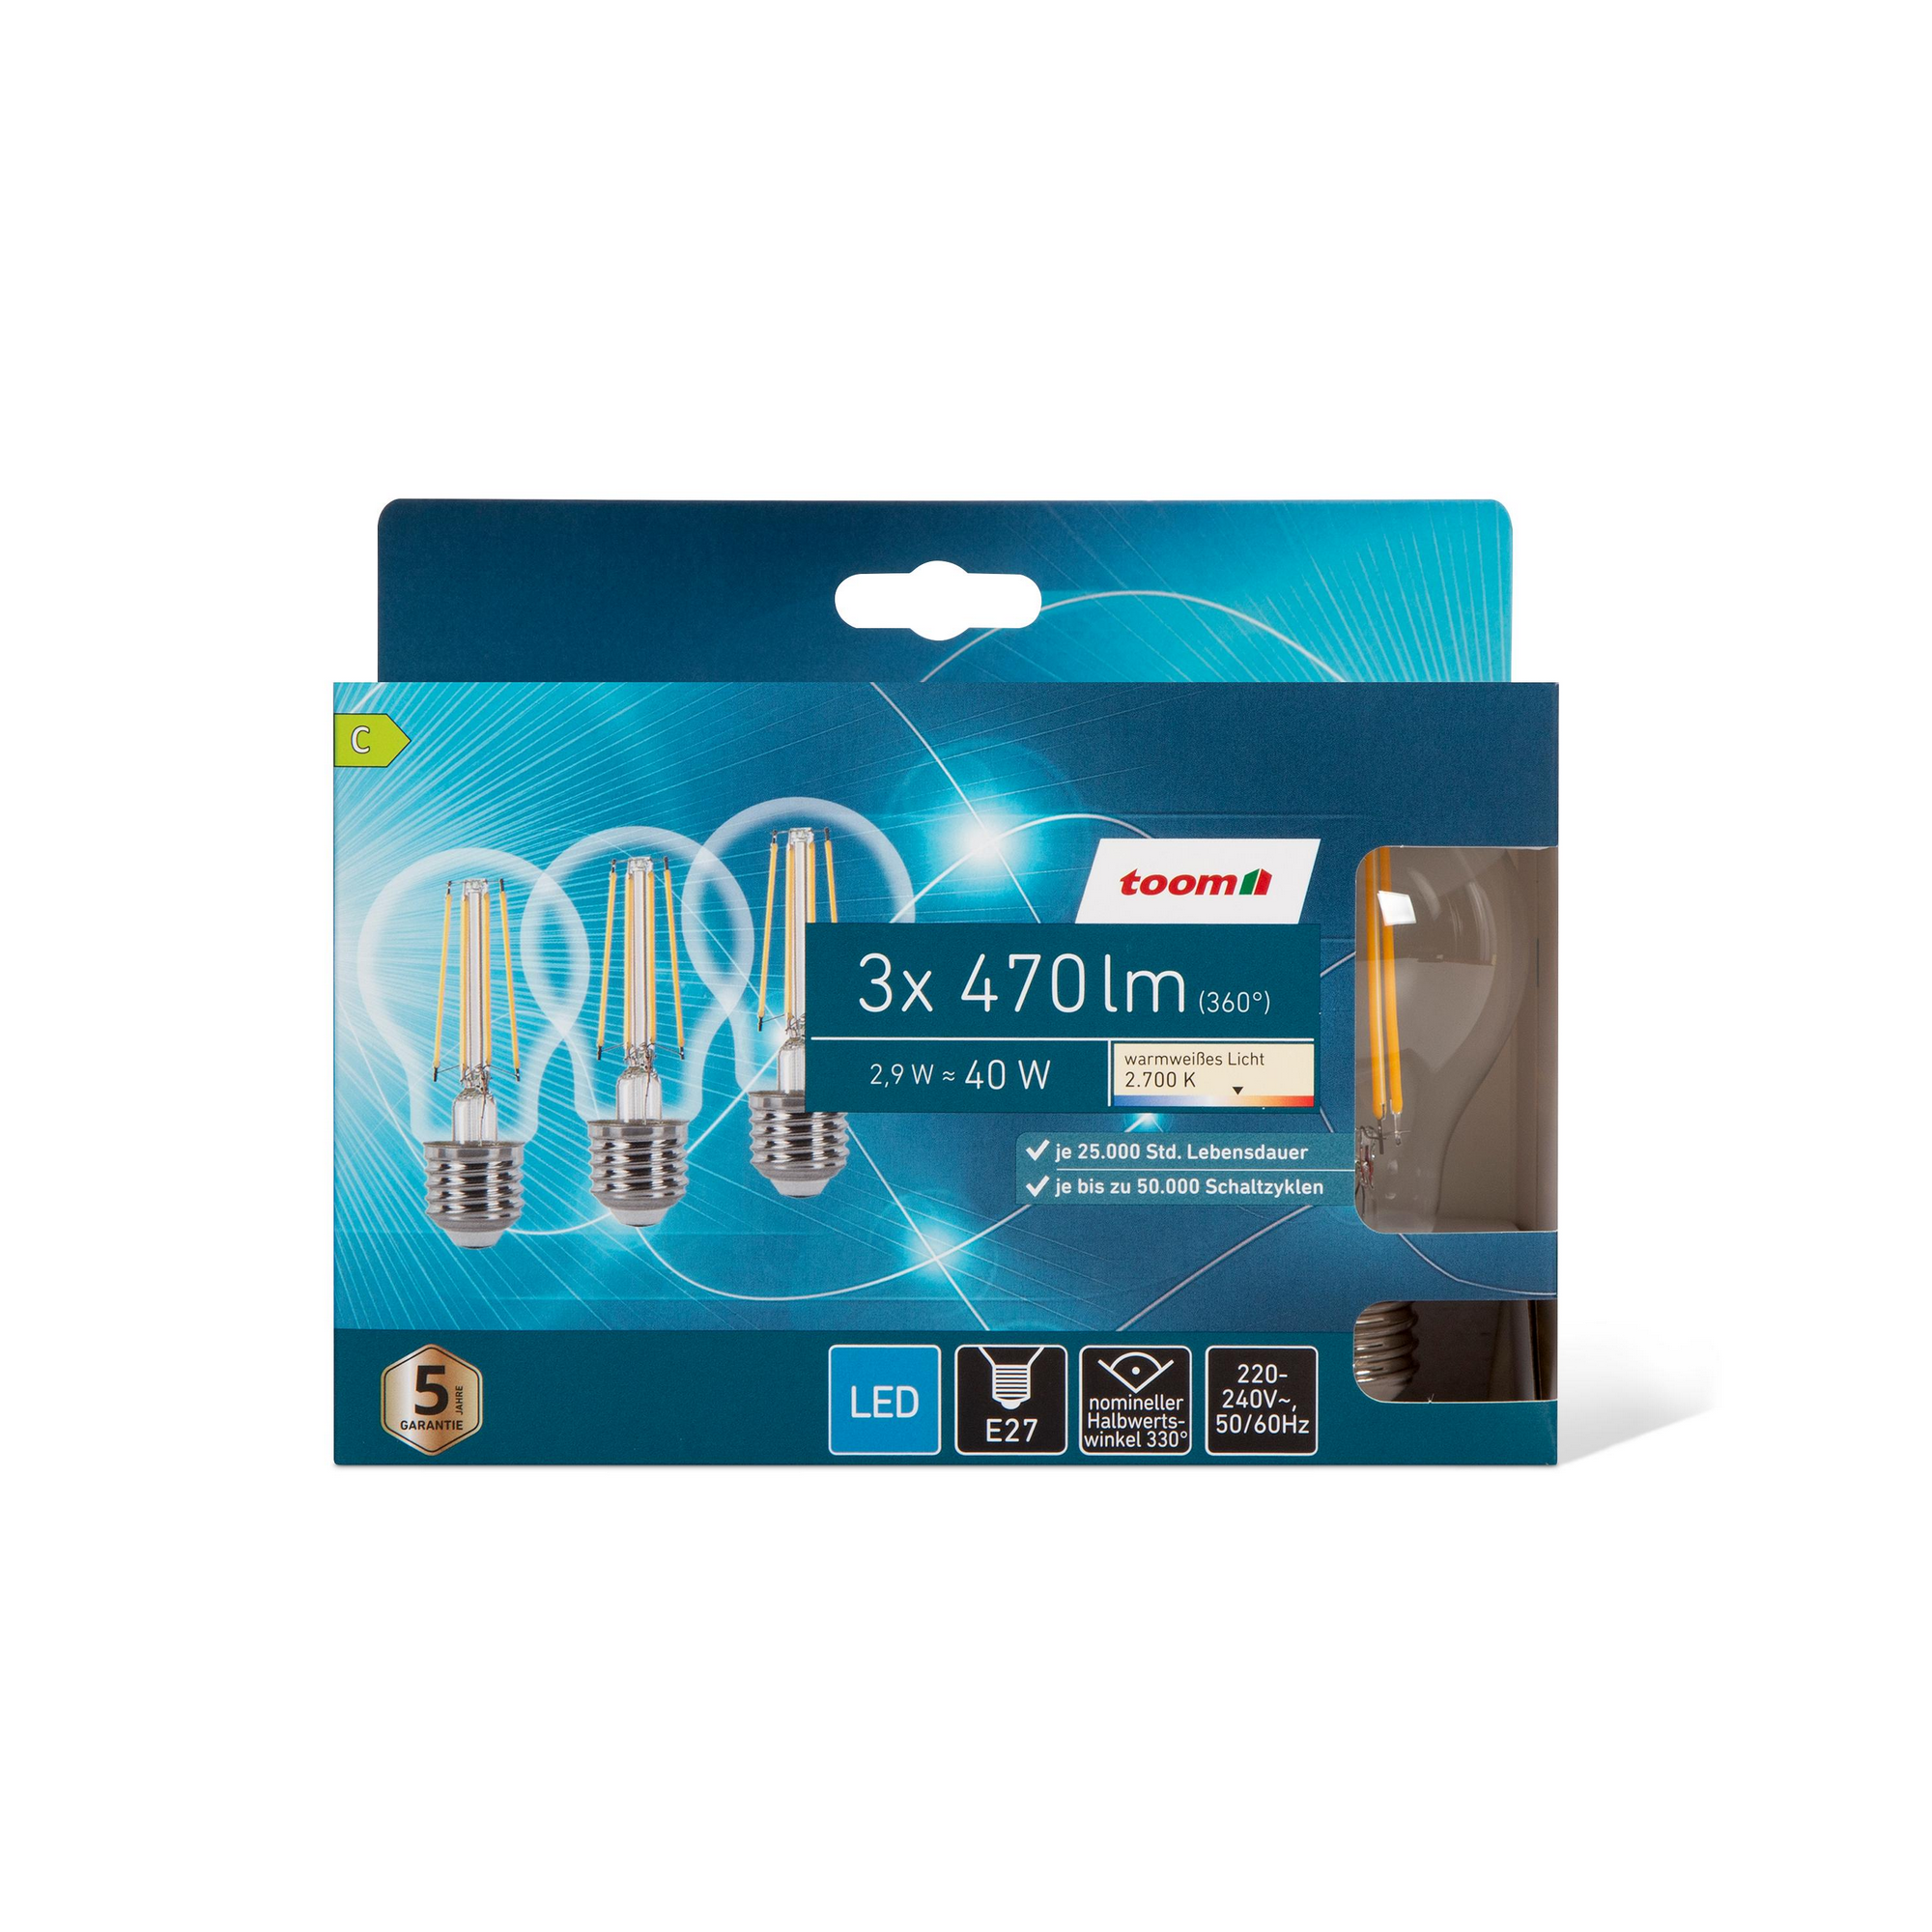 LED-Tropfenlampe klar warmweiß E27 40 W 470 lm, 3er-Pack + product picture